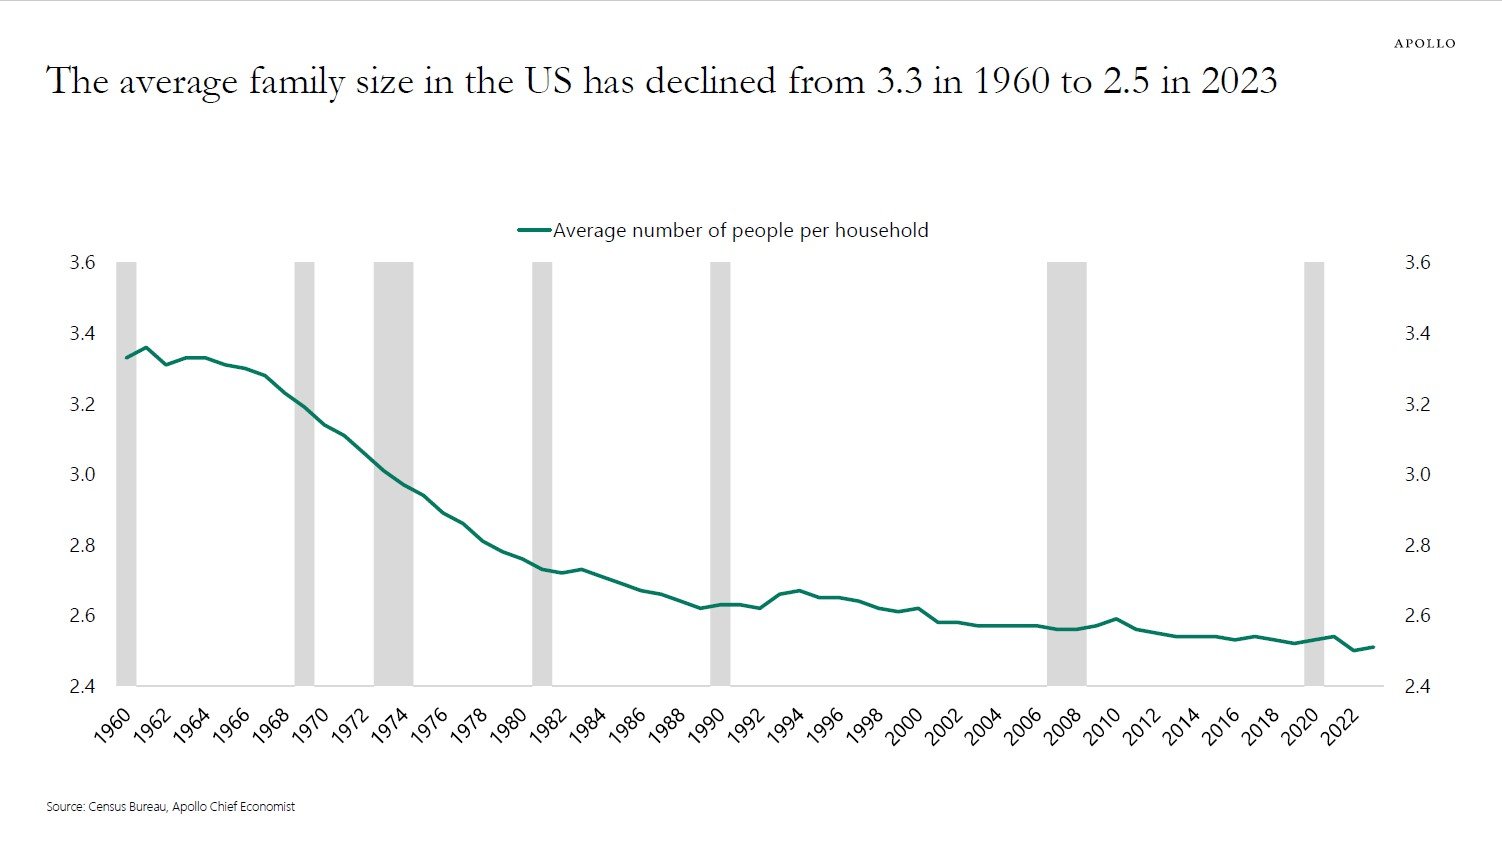 Line chart illustrating the decline in average family size from 3.3 in 1960 to 2.5 today. Decrease began in 1965 with the enactment of the Social Security Act. Recent decreases, although stabilizing, are attributed to families having fewer children.